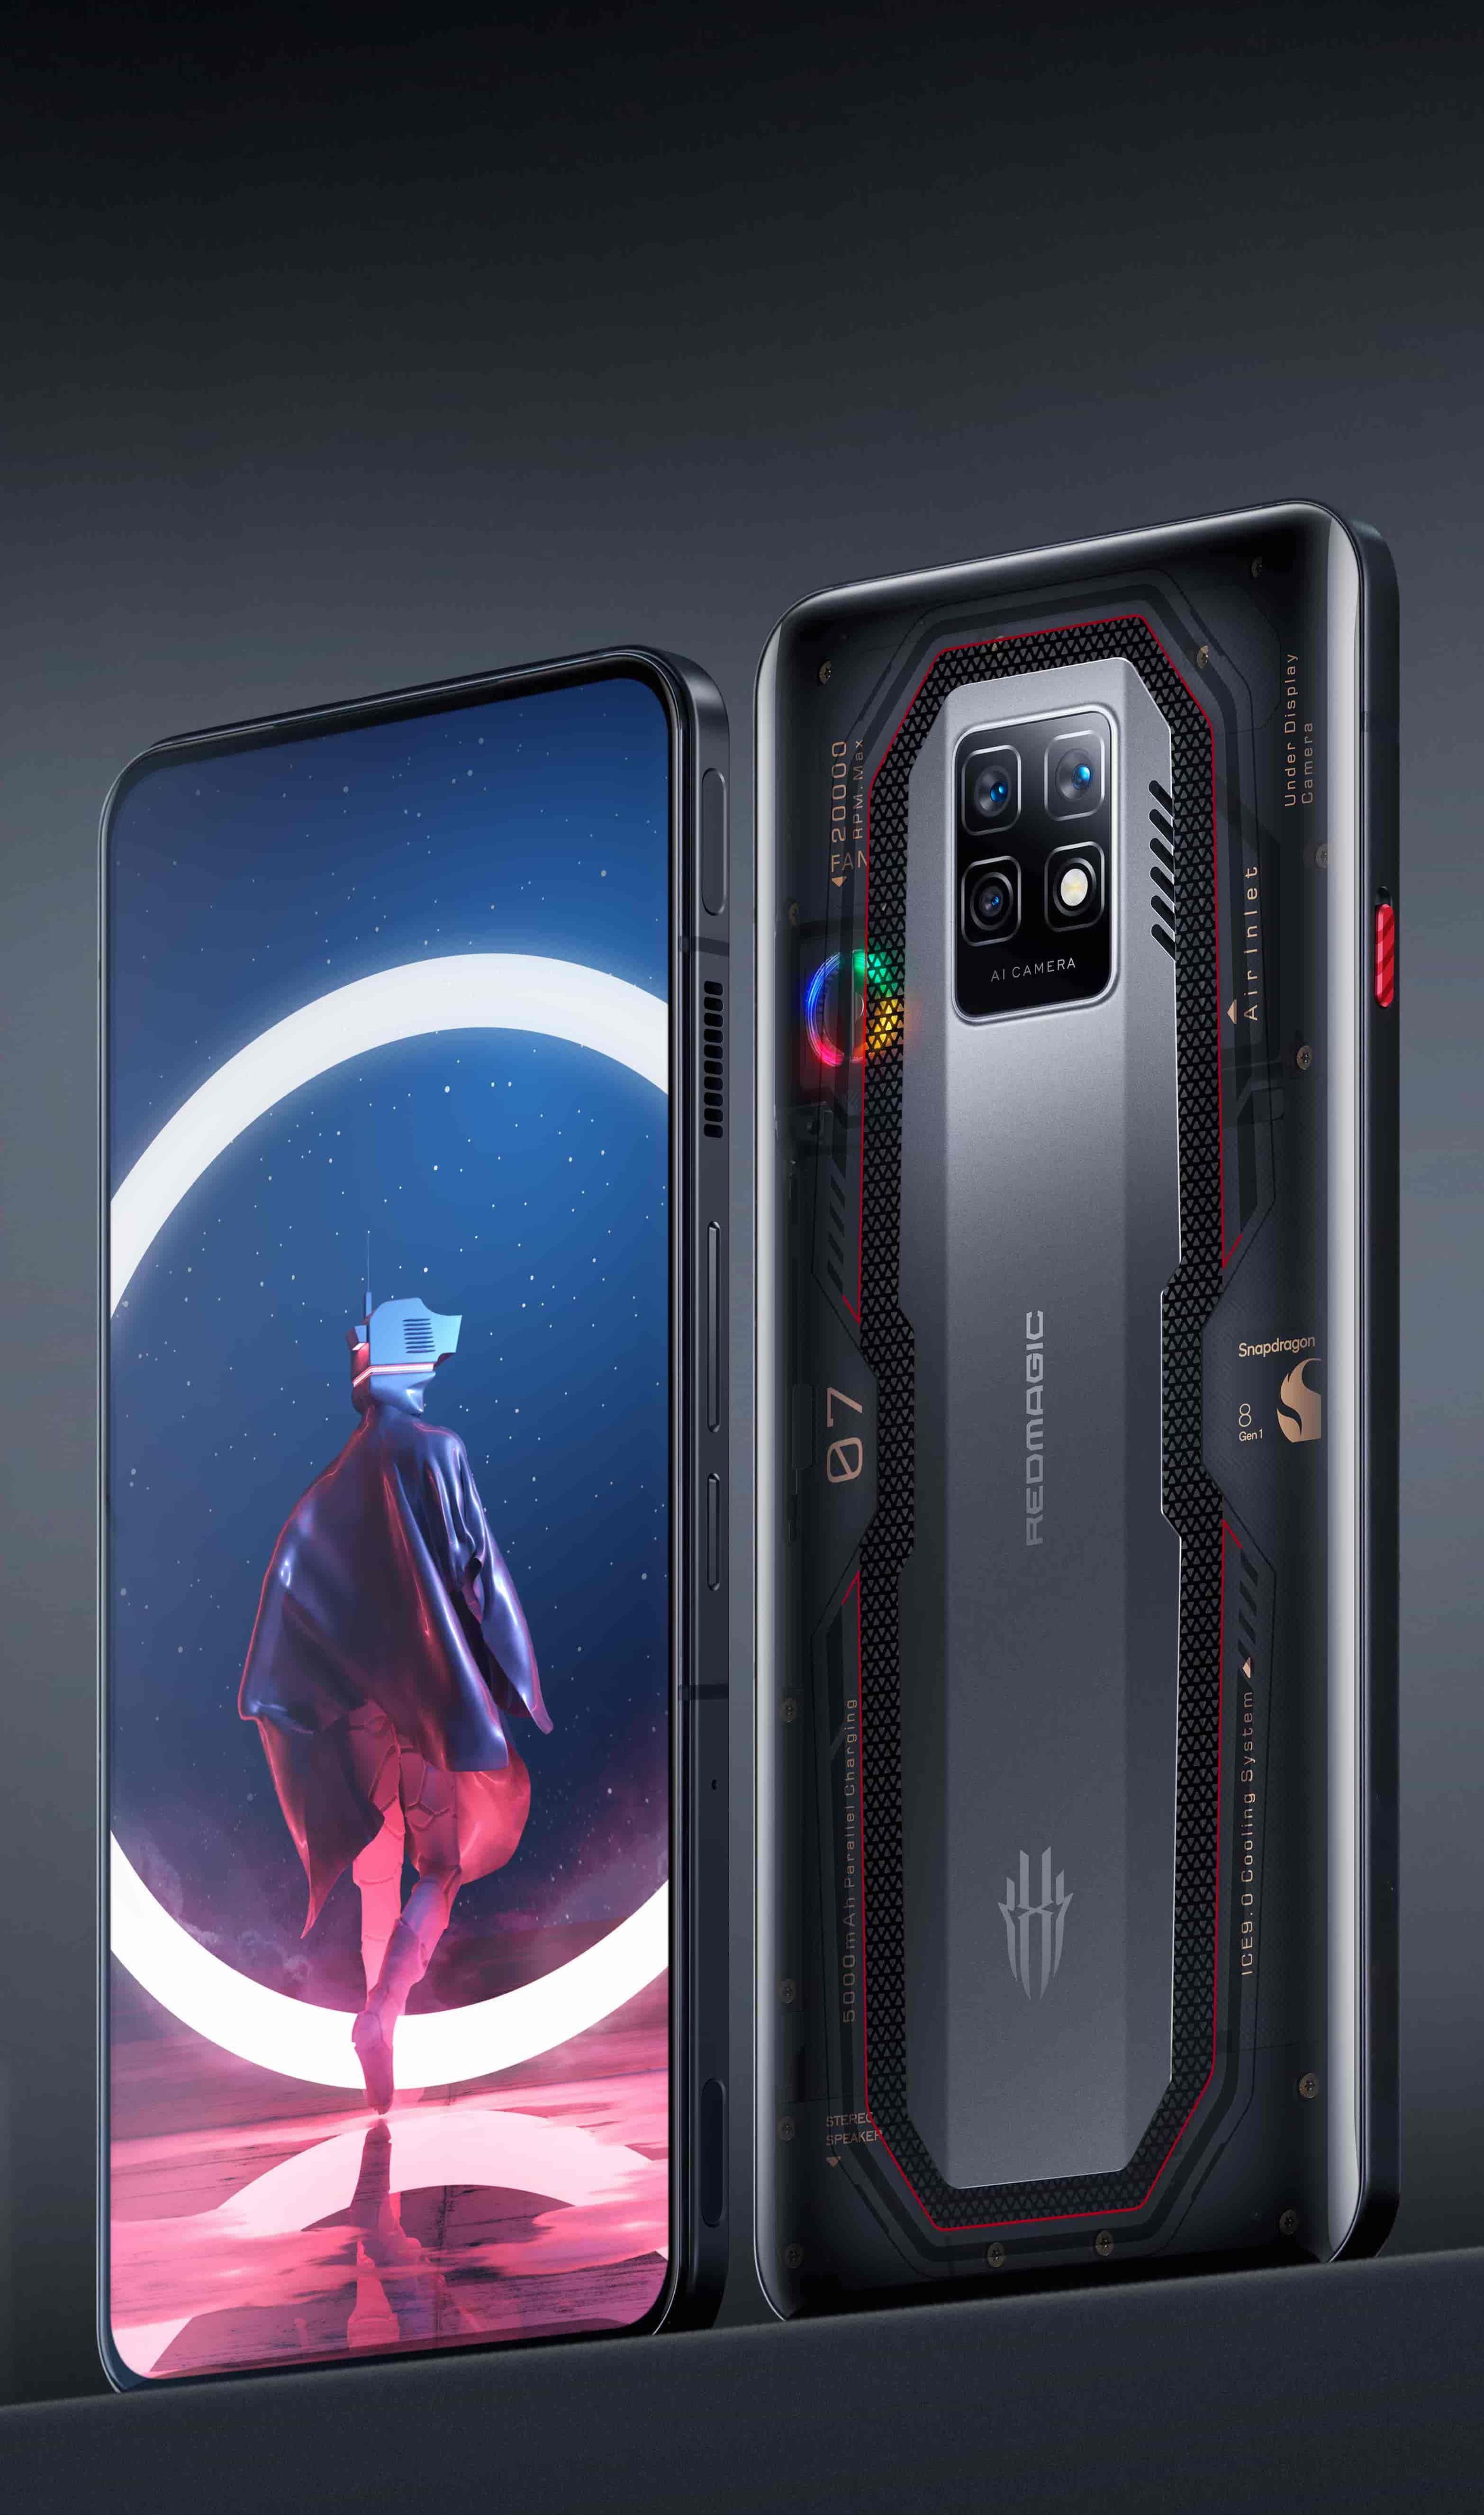 nubia unveiled the Red Magic 7 and Red Magic 7 Pro gaming smartphones